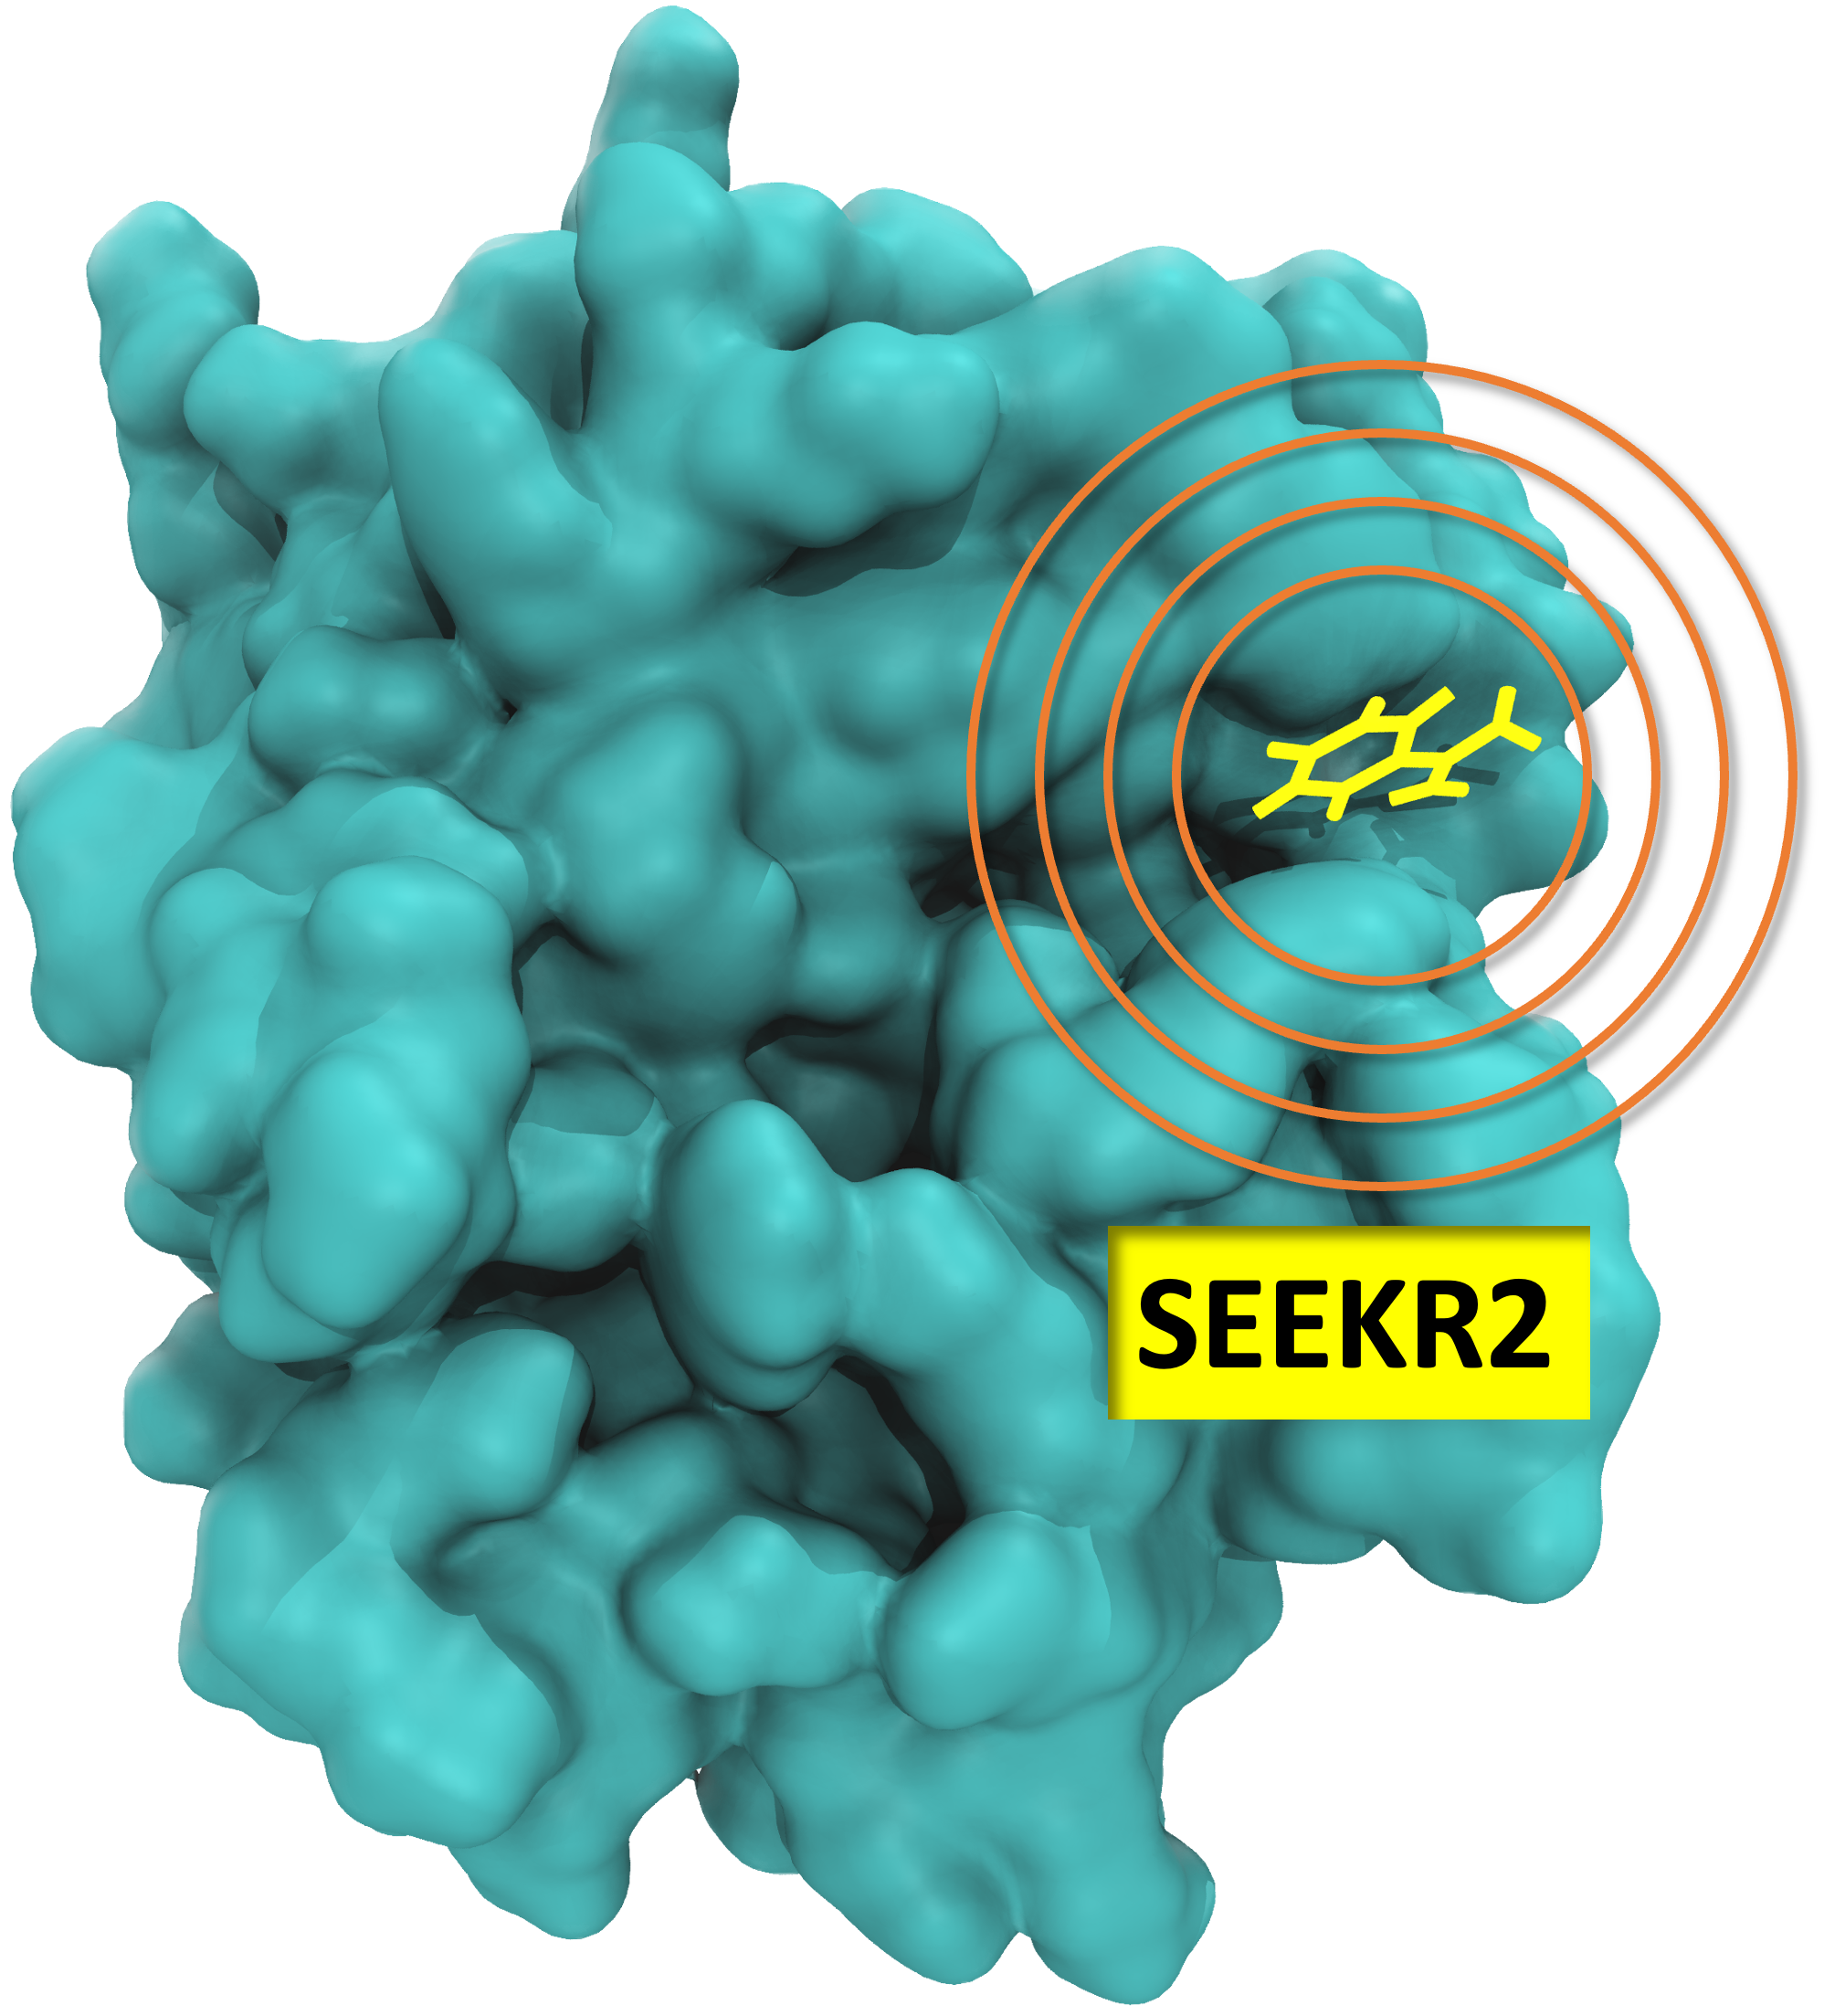 SEEKR2 being used to find kinetics around a binding site